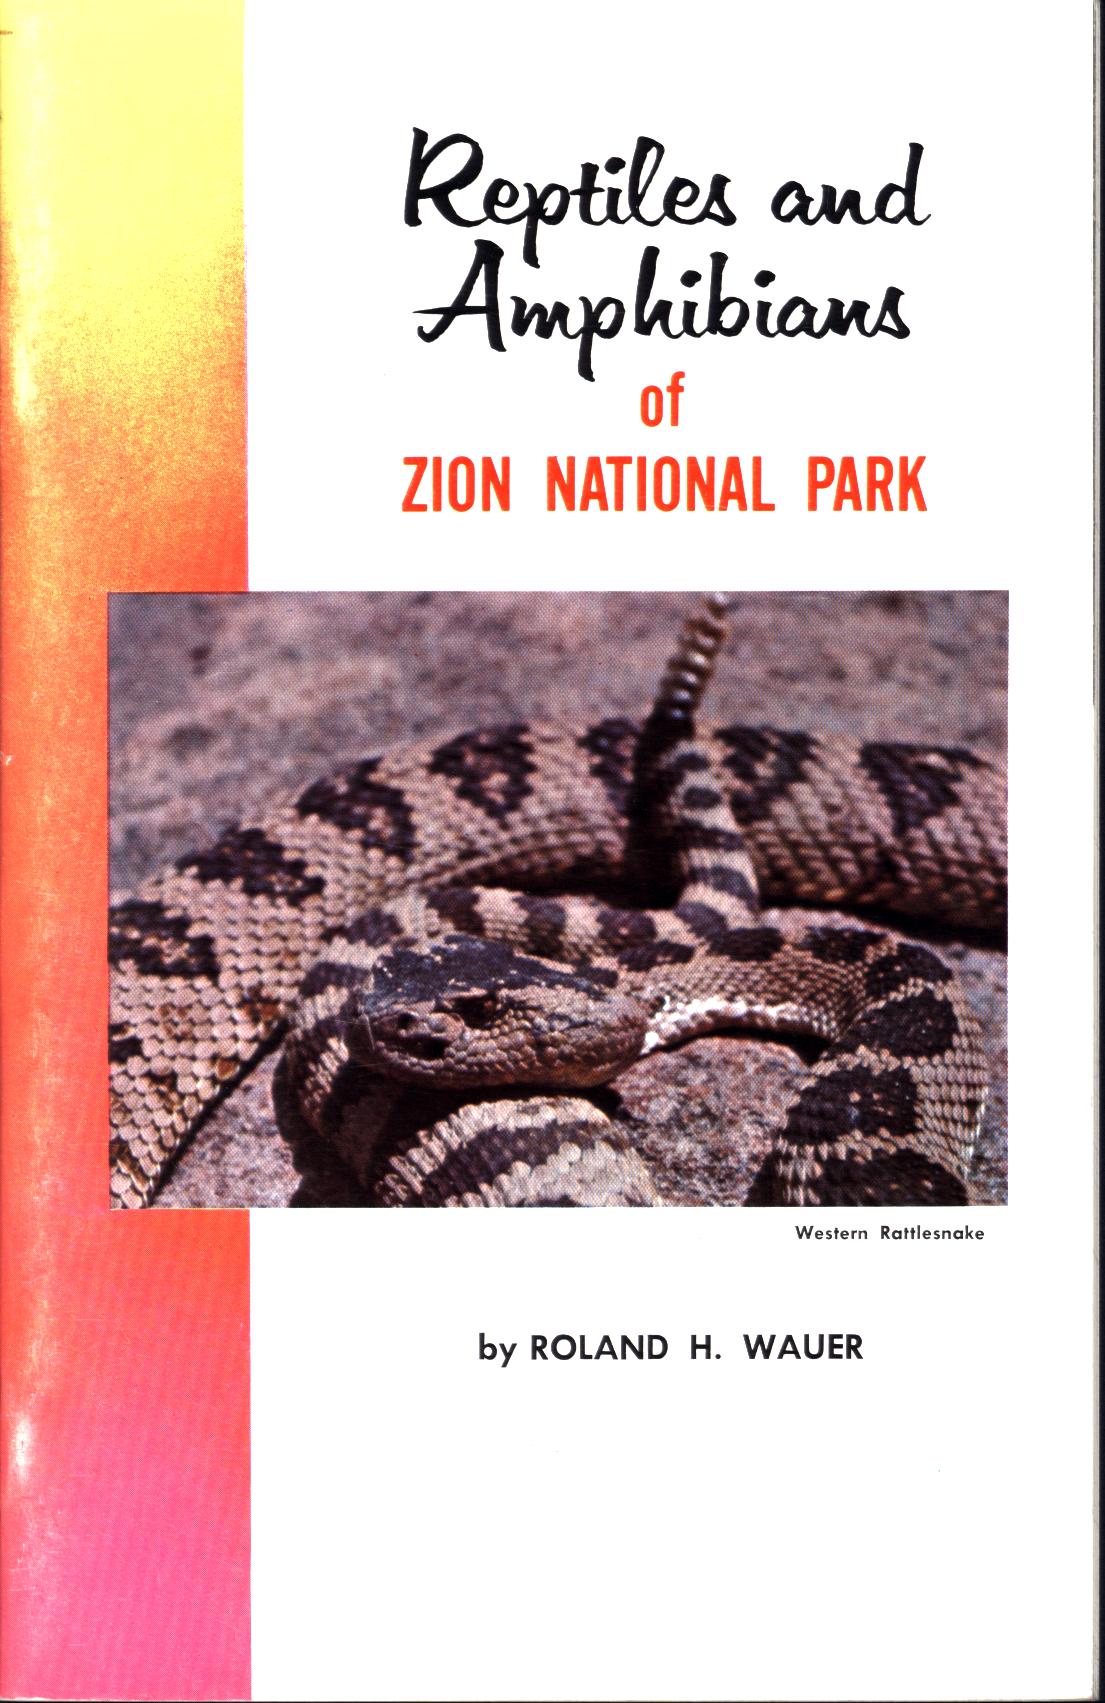 REPTILES AND AMPHIBIANS OF ZION NATIONAL PARK. 